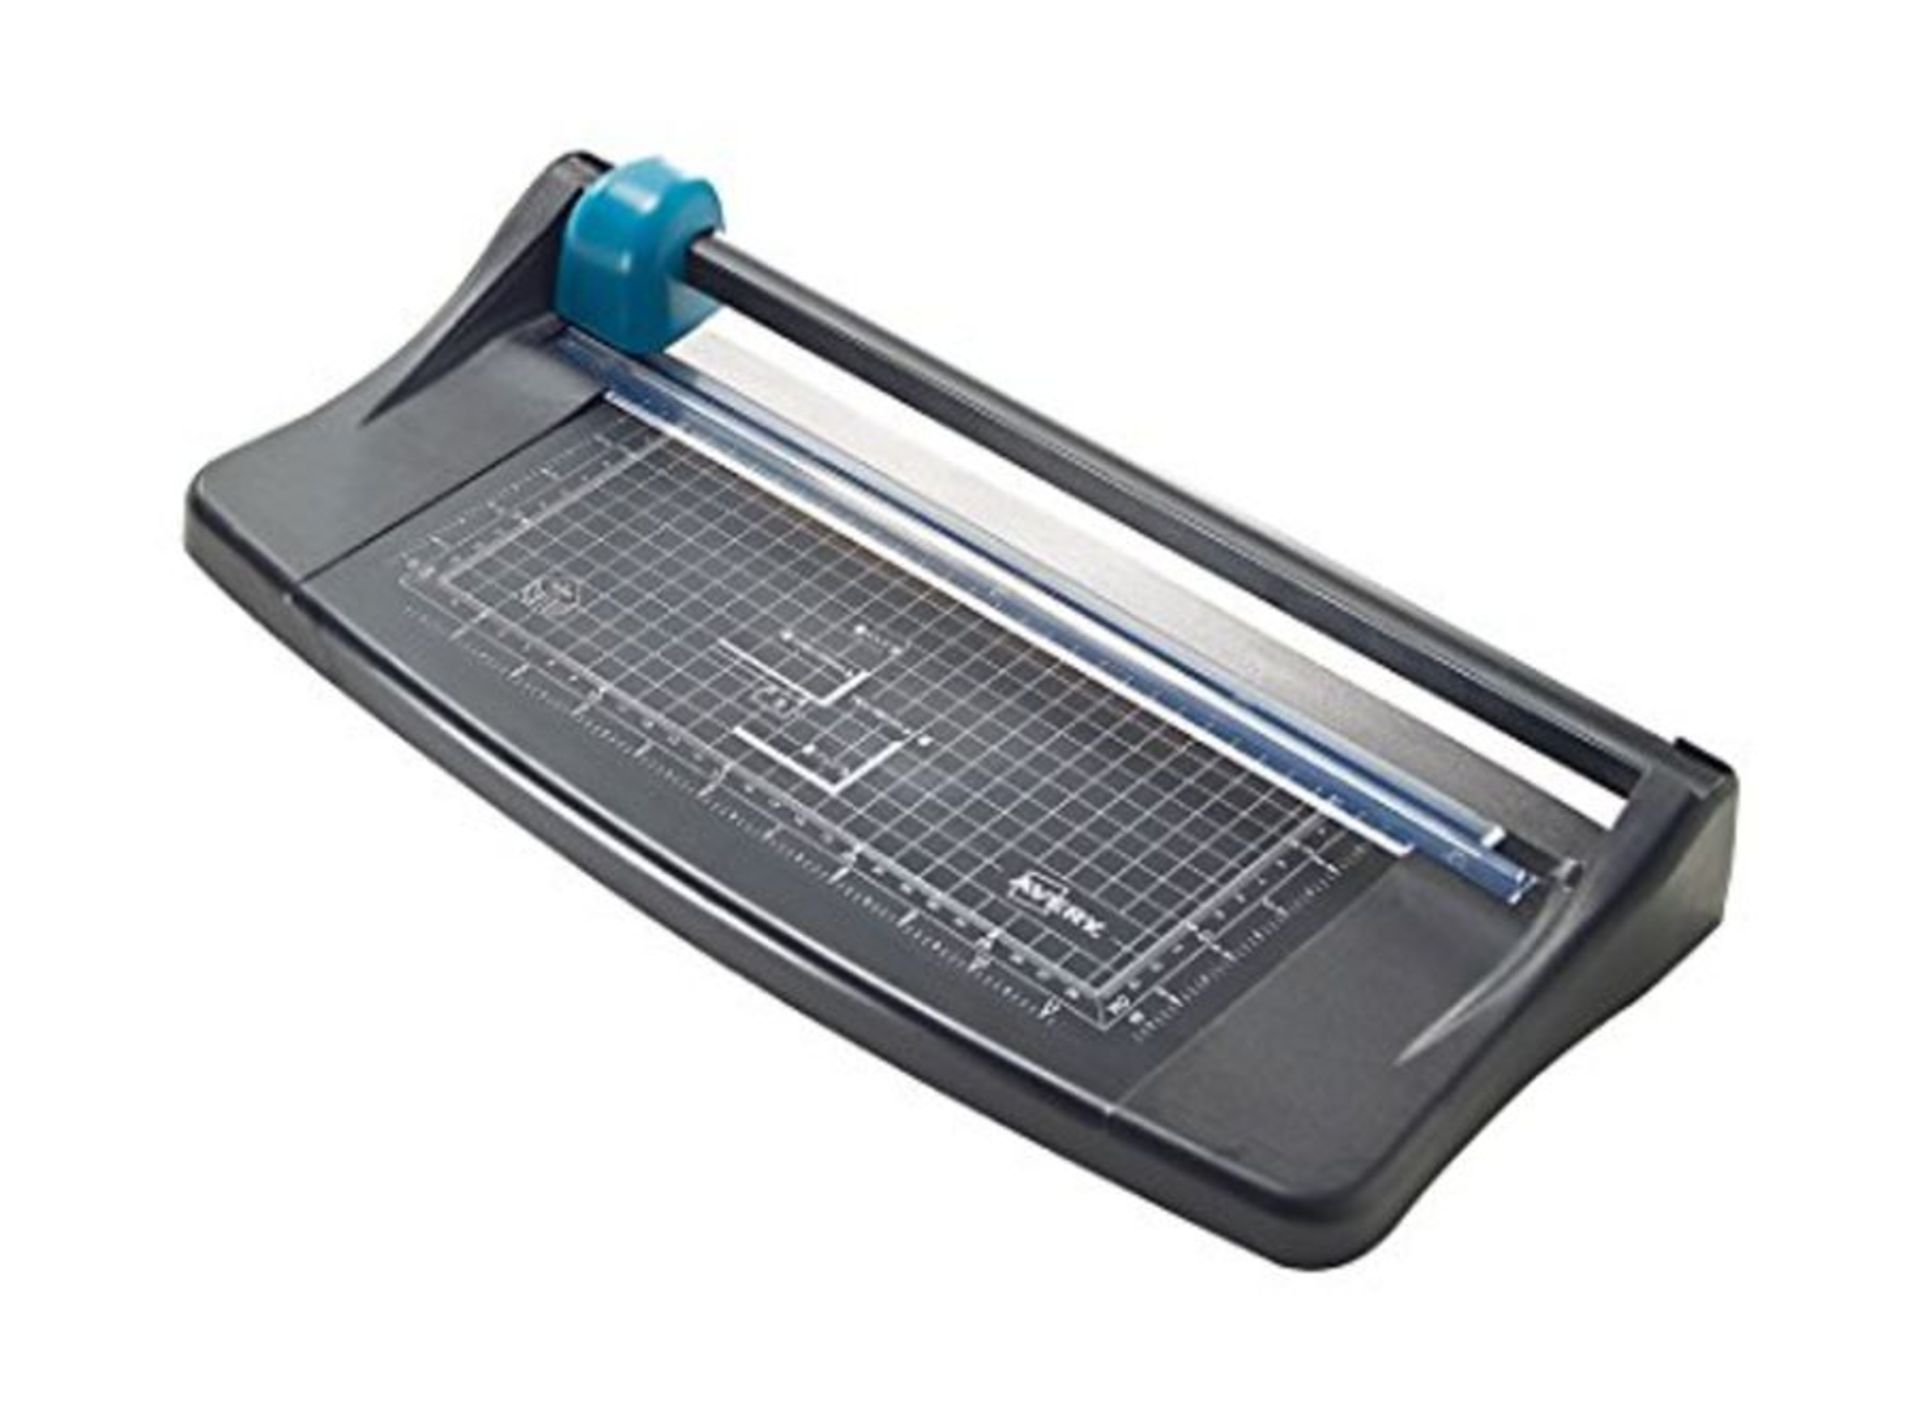 [CRACKED] Avery A4 TR002 Photo and Paper Trimmer - paper cutter, Black and Teal